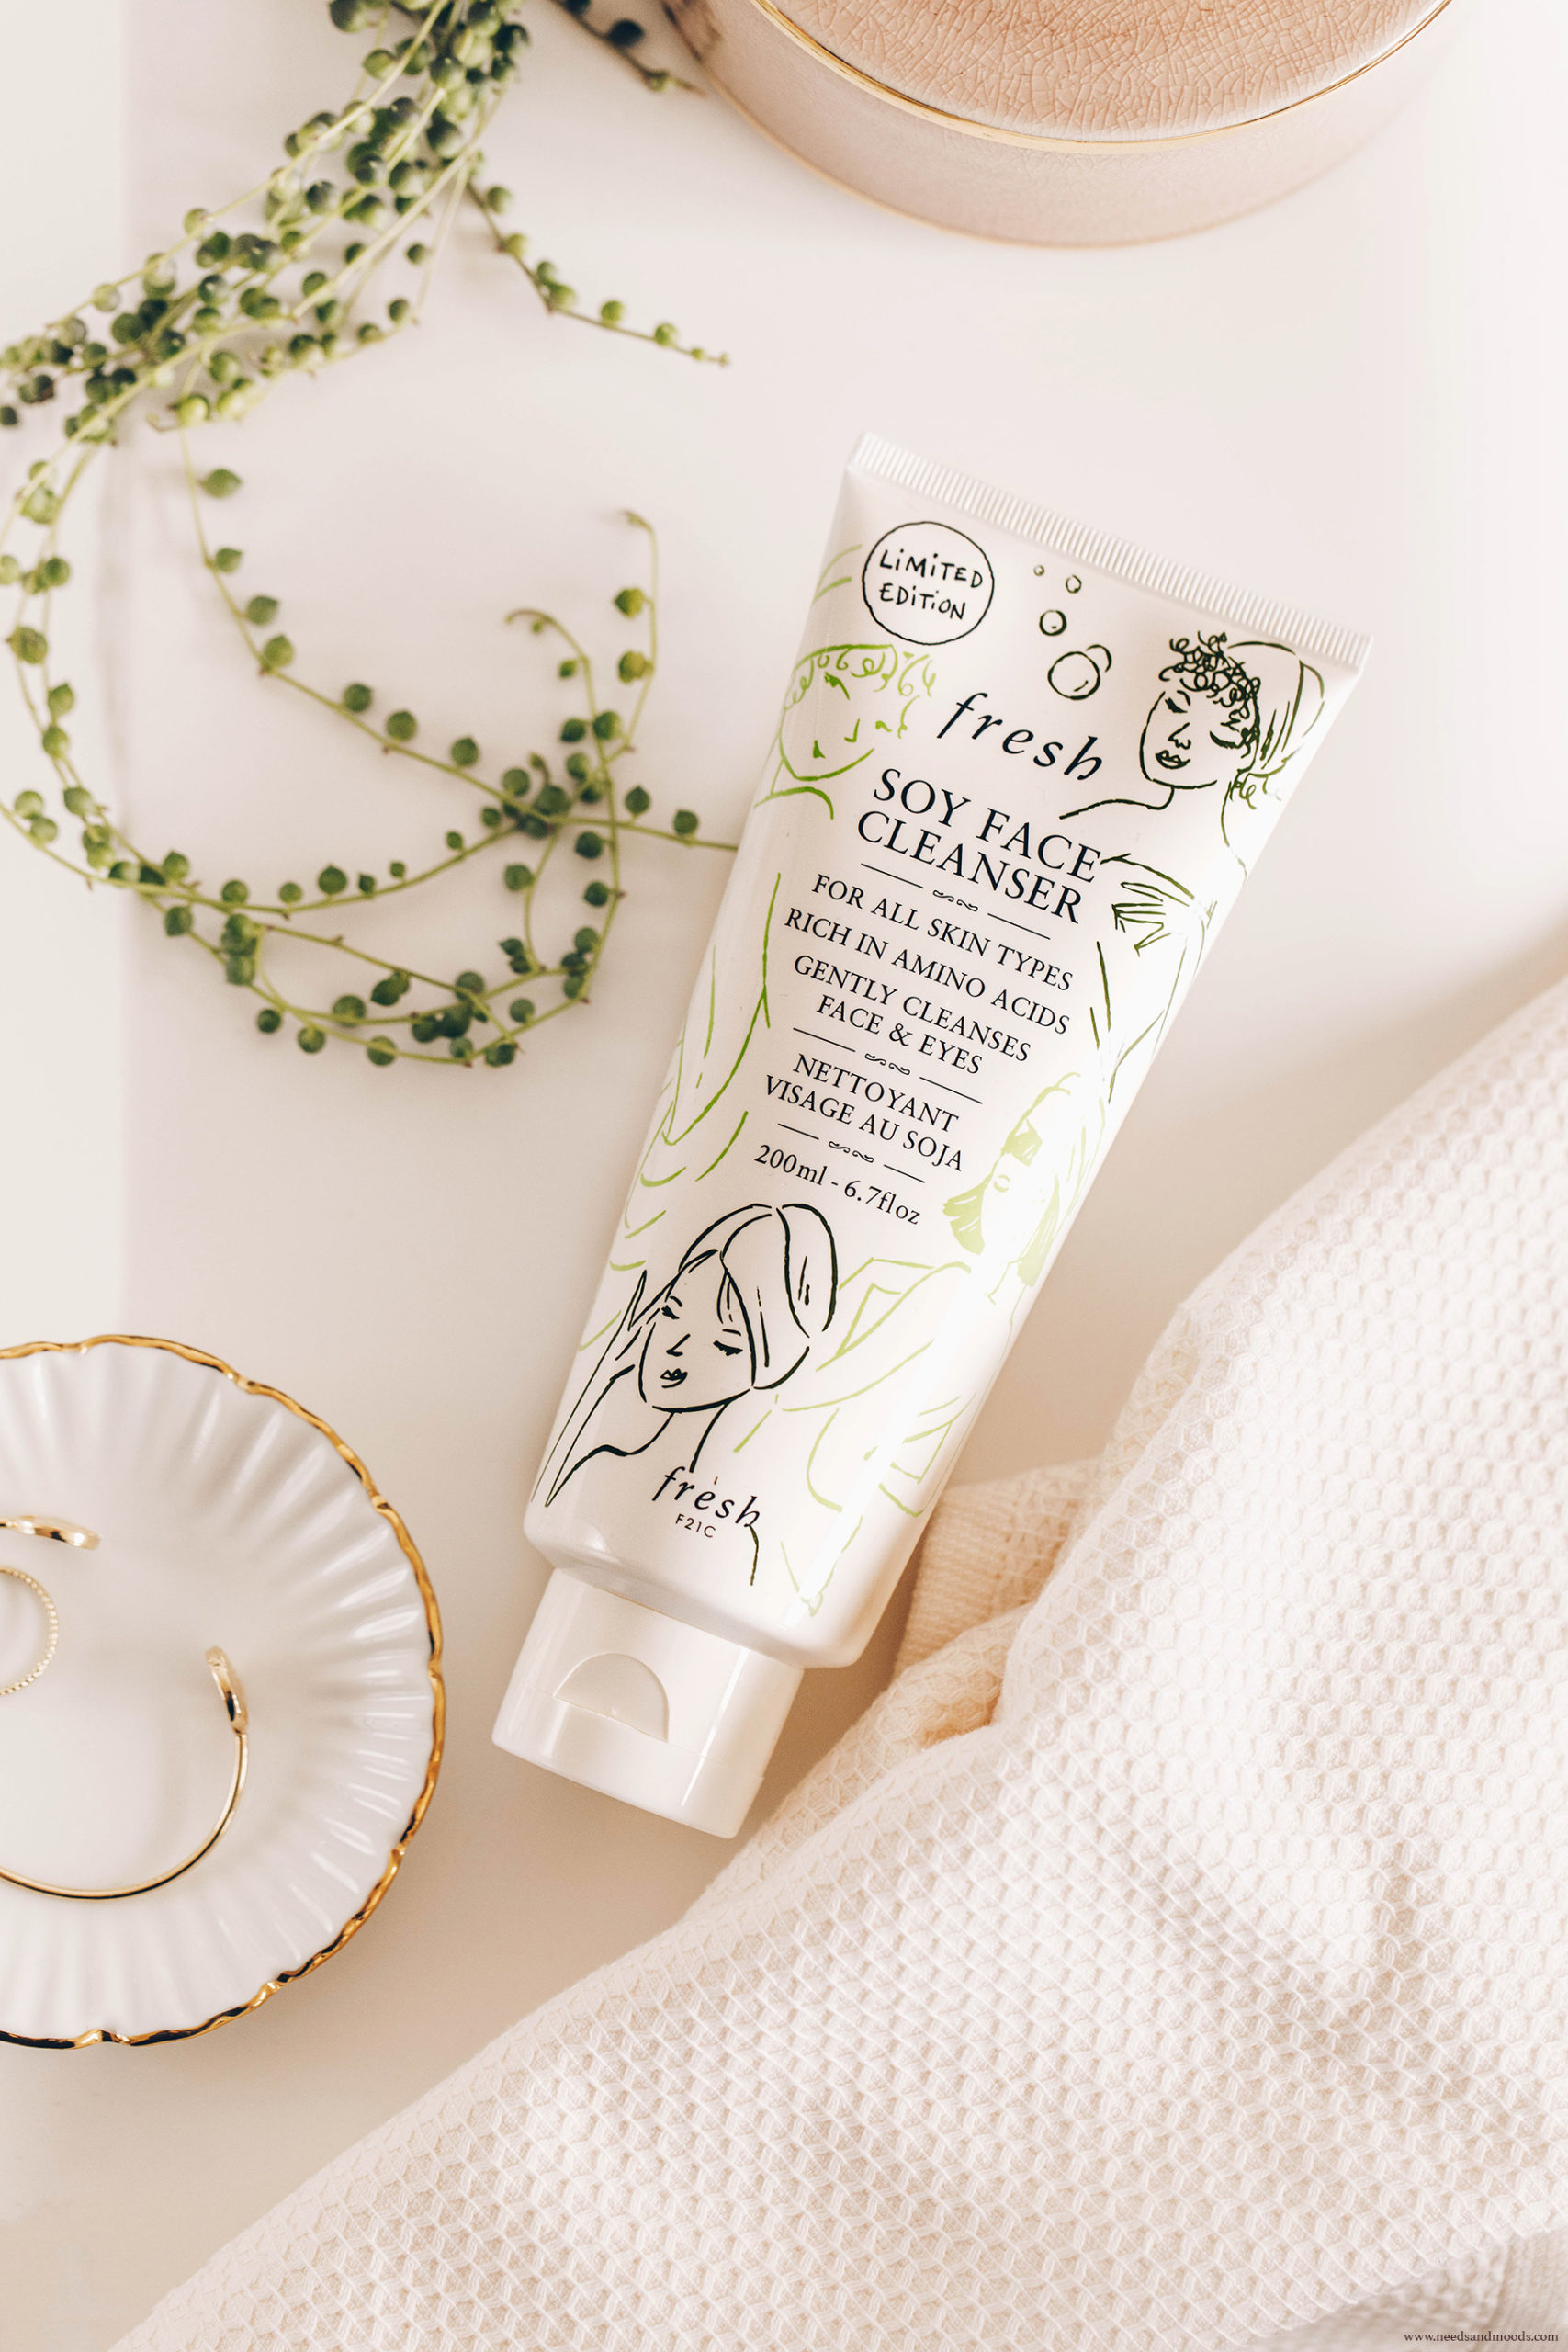 fresh soy face cleanser edition limitee anniversaire 30 ans